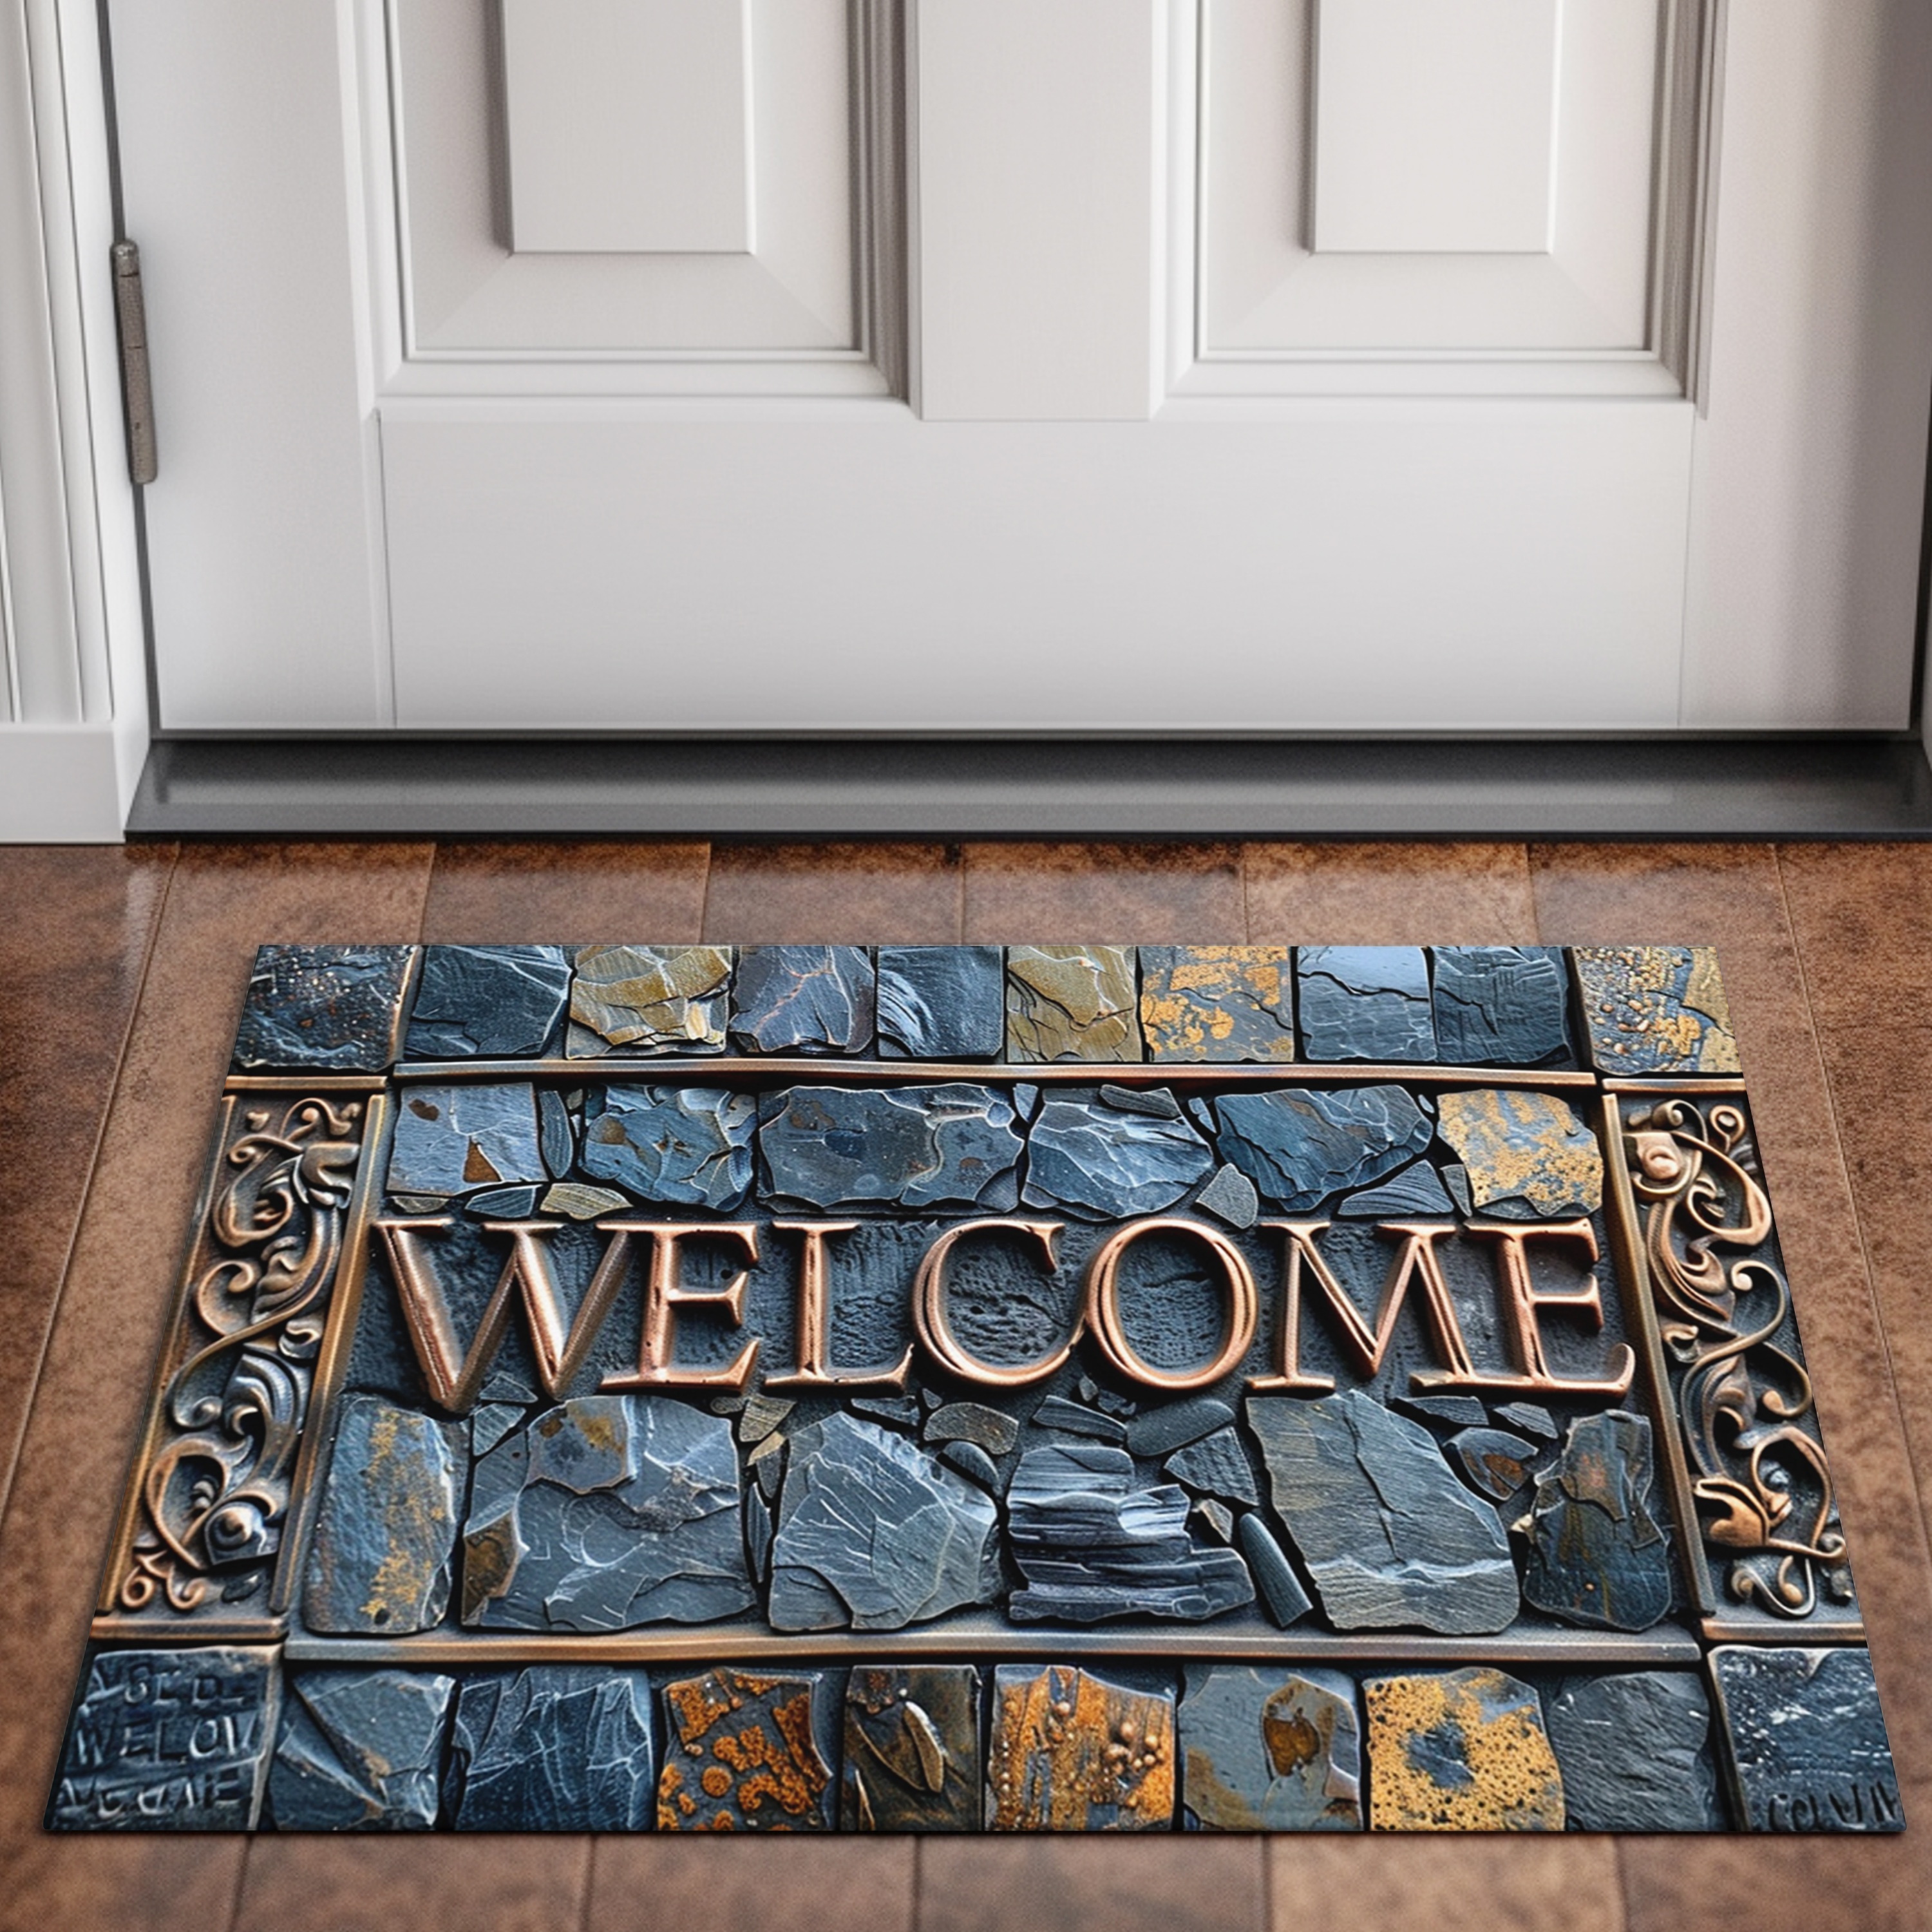 

high-traffic Ready" Welcome Cobblestone 3d Stone Pattern Rug - Non-slip, Waterproof, Machine Washable Polyester Carpet For Home & Outdoor Decor - Perfect For Entrance, Living Room, Bathroom, Balcony